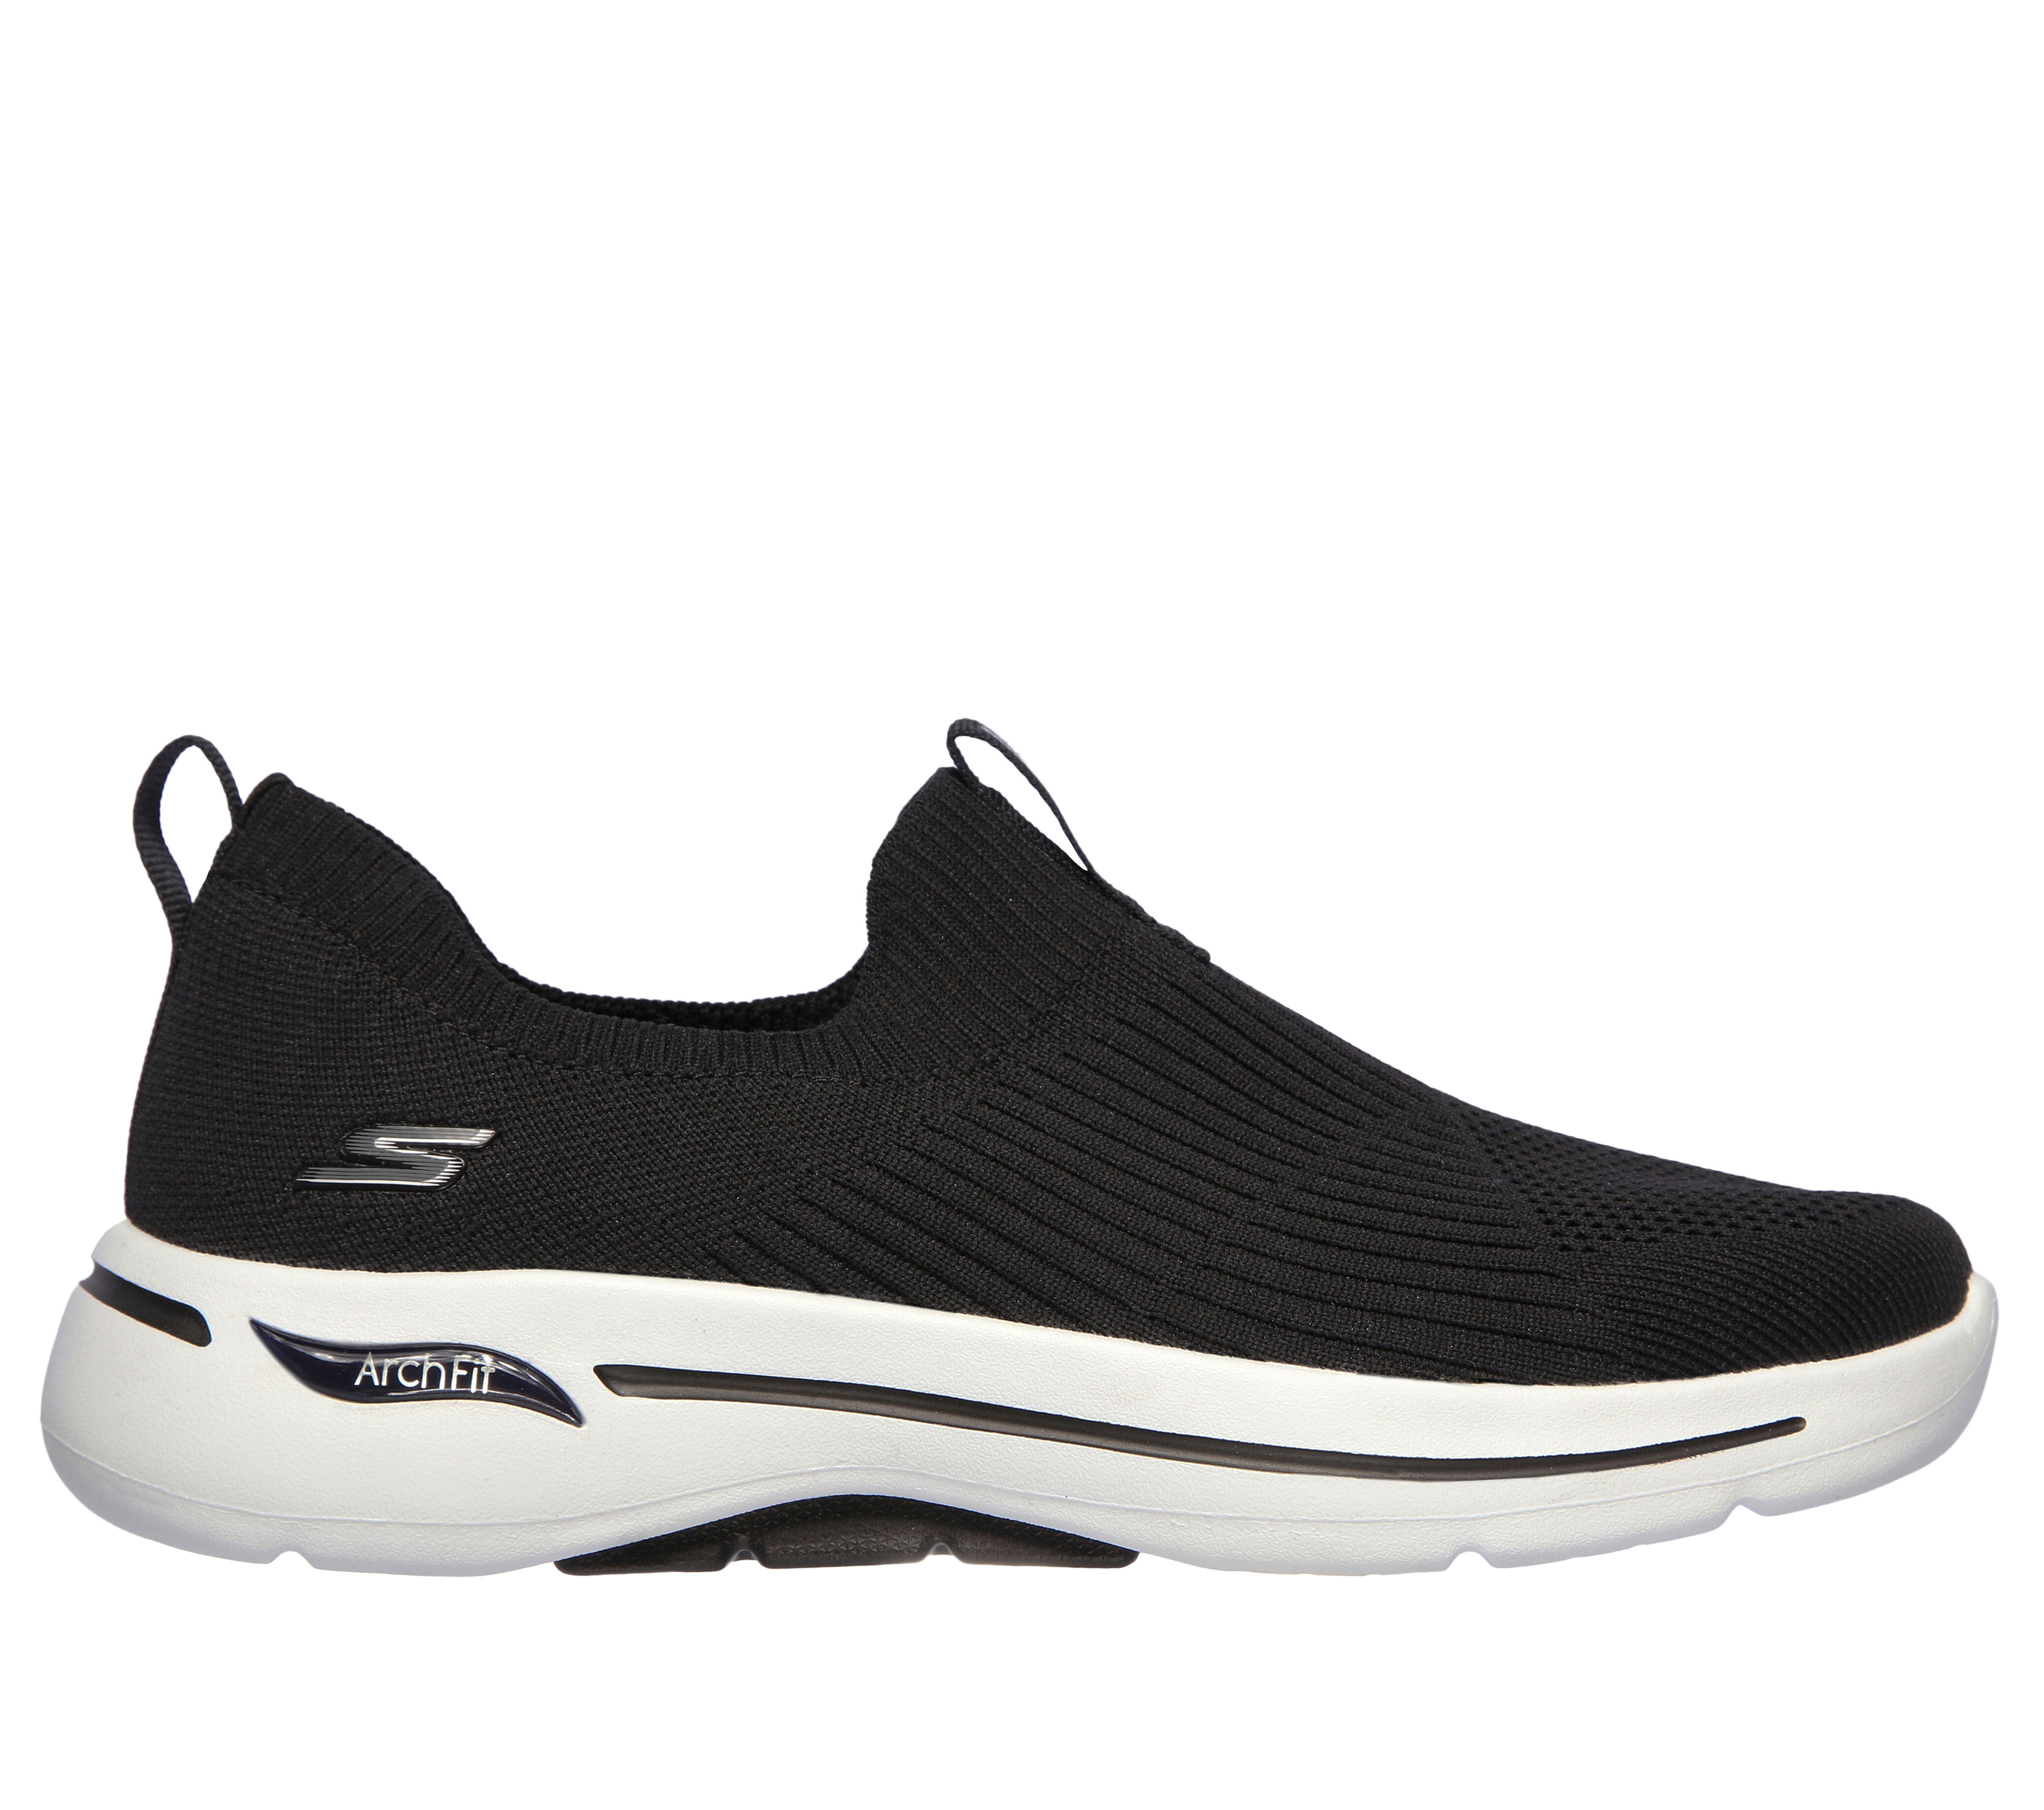 skechers shoes without laces